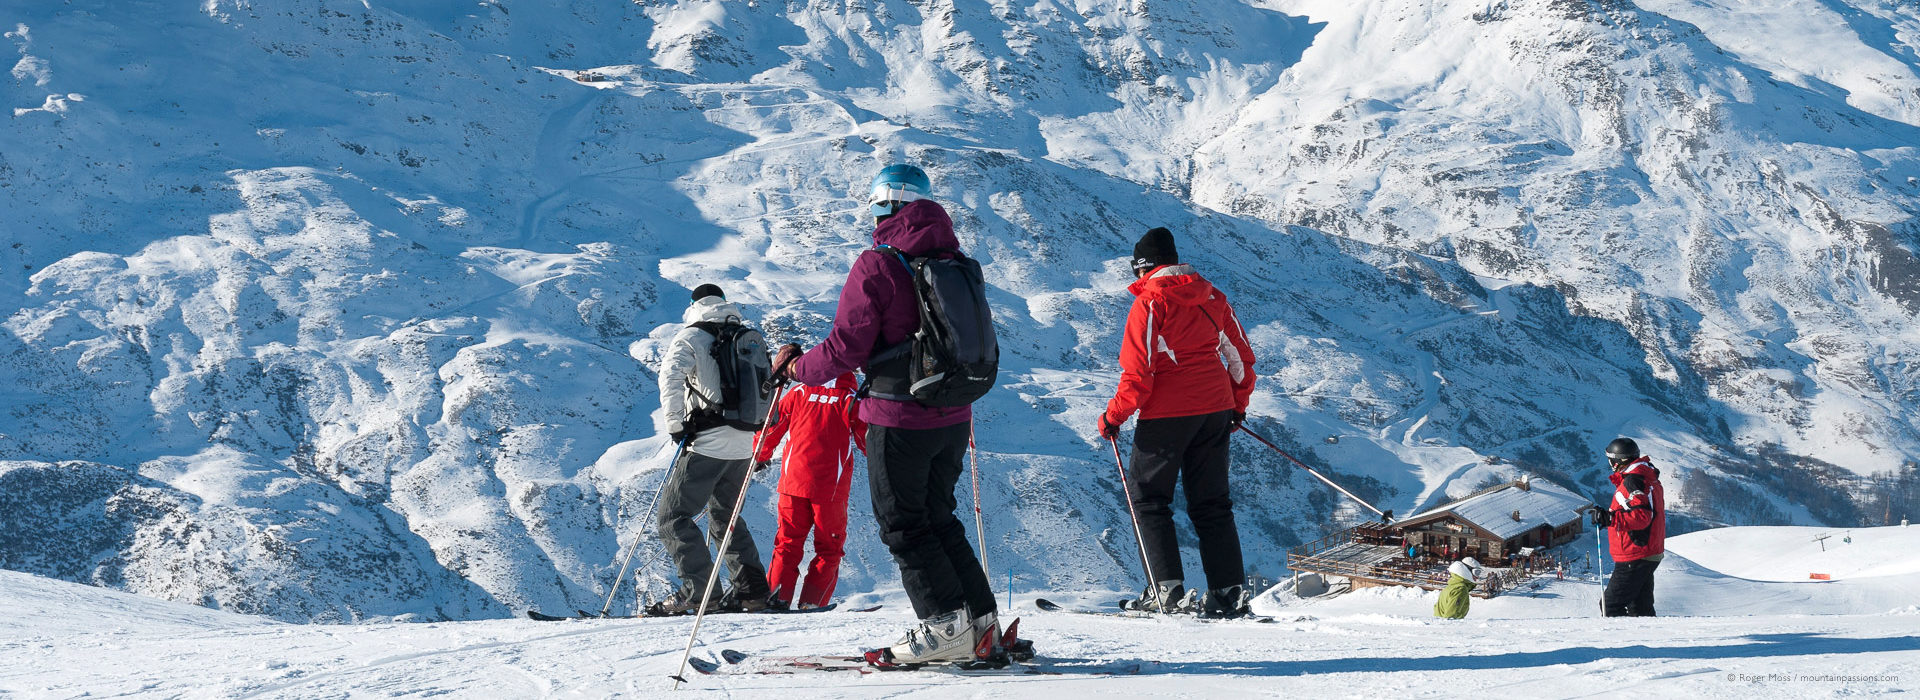 Group of skiers above mountain restaurant with snowy background.